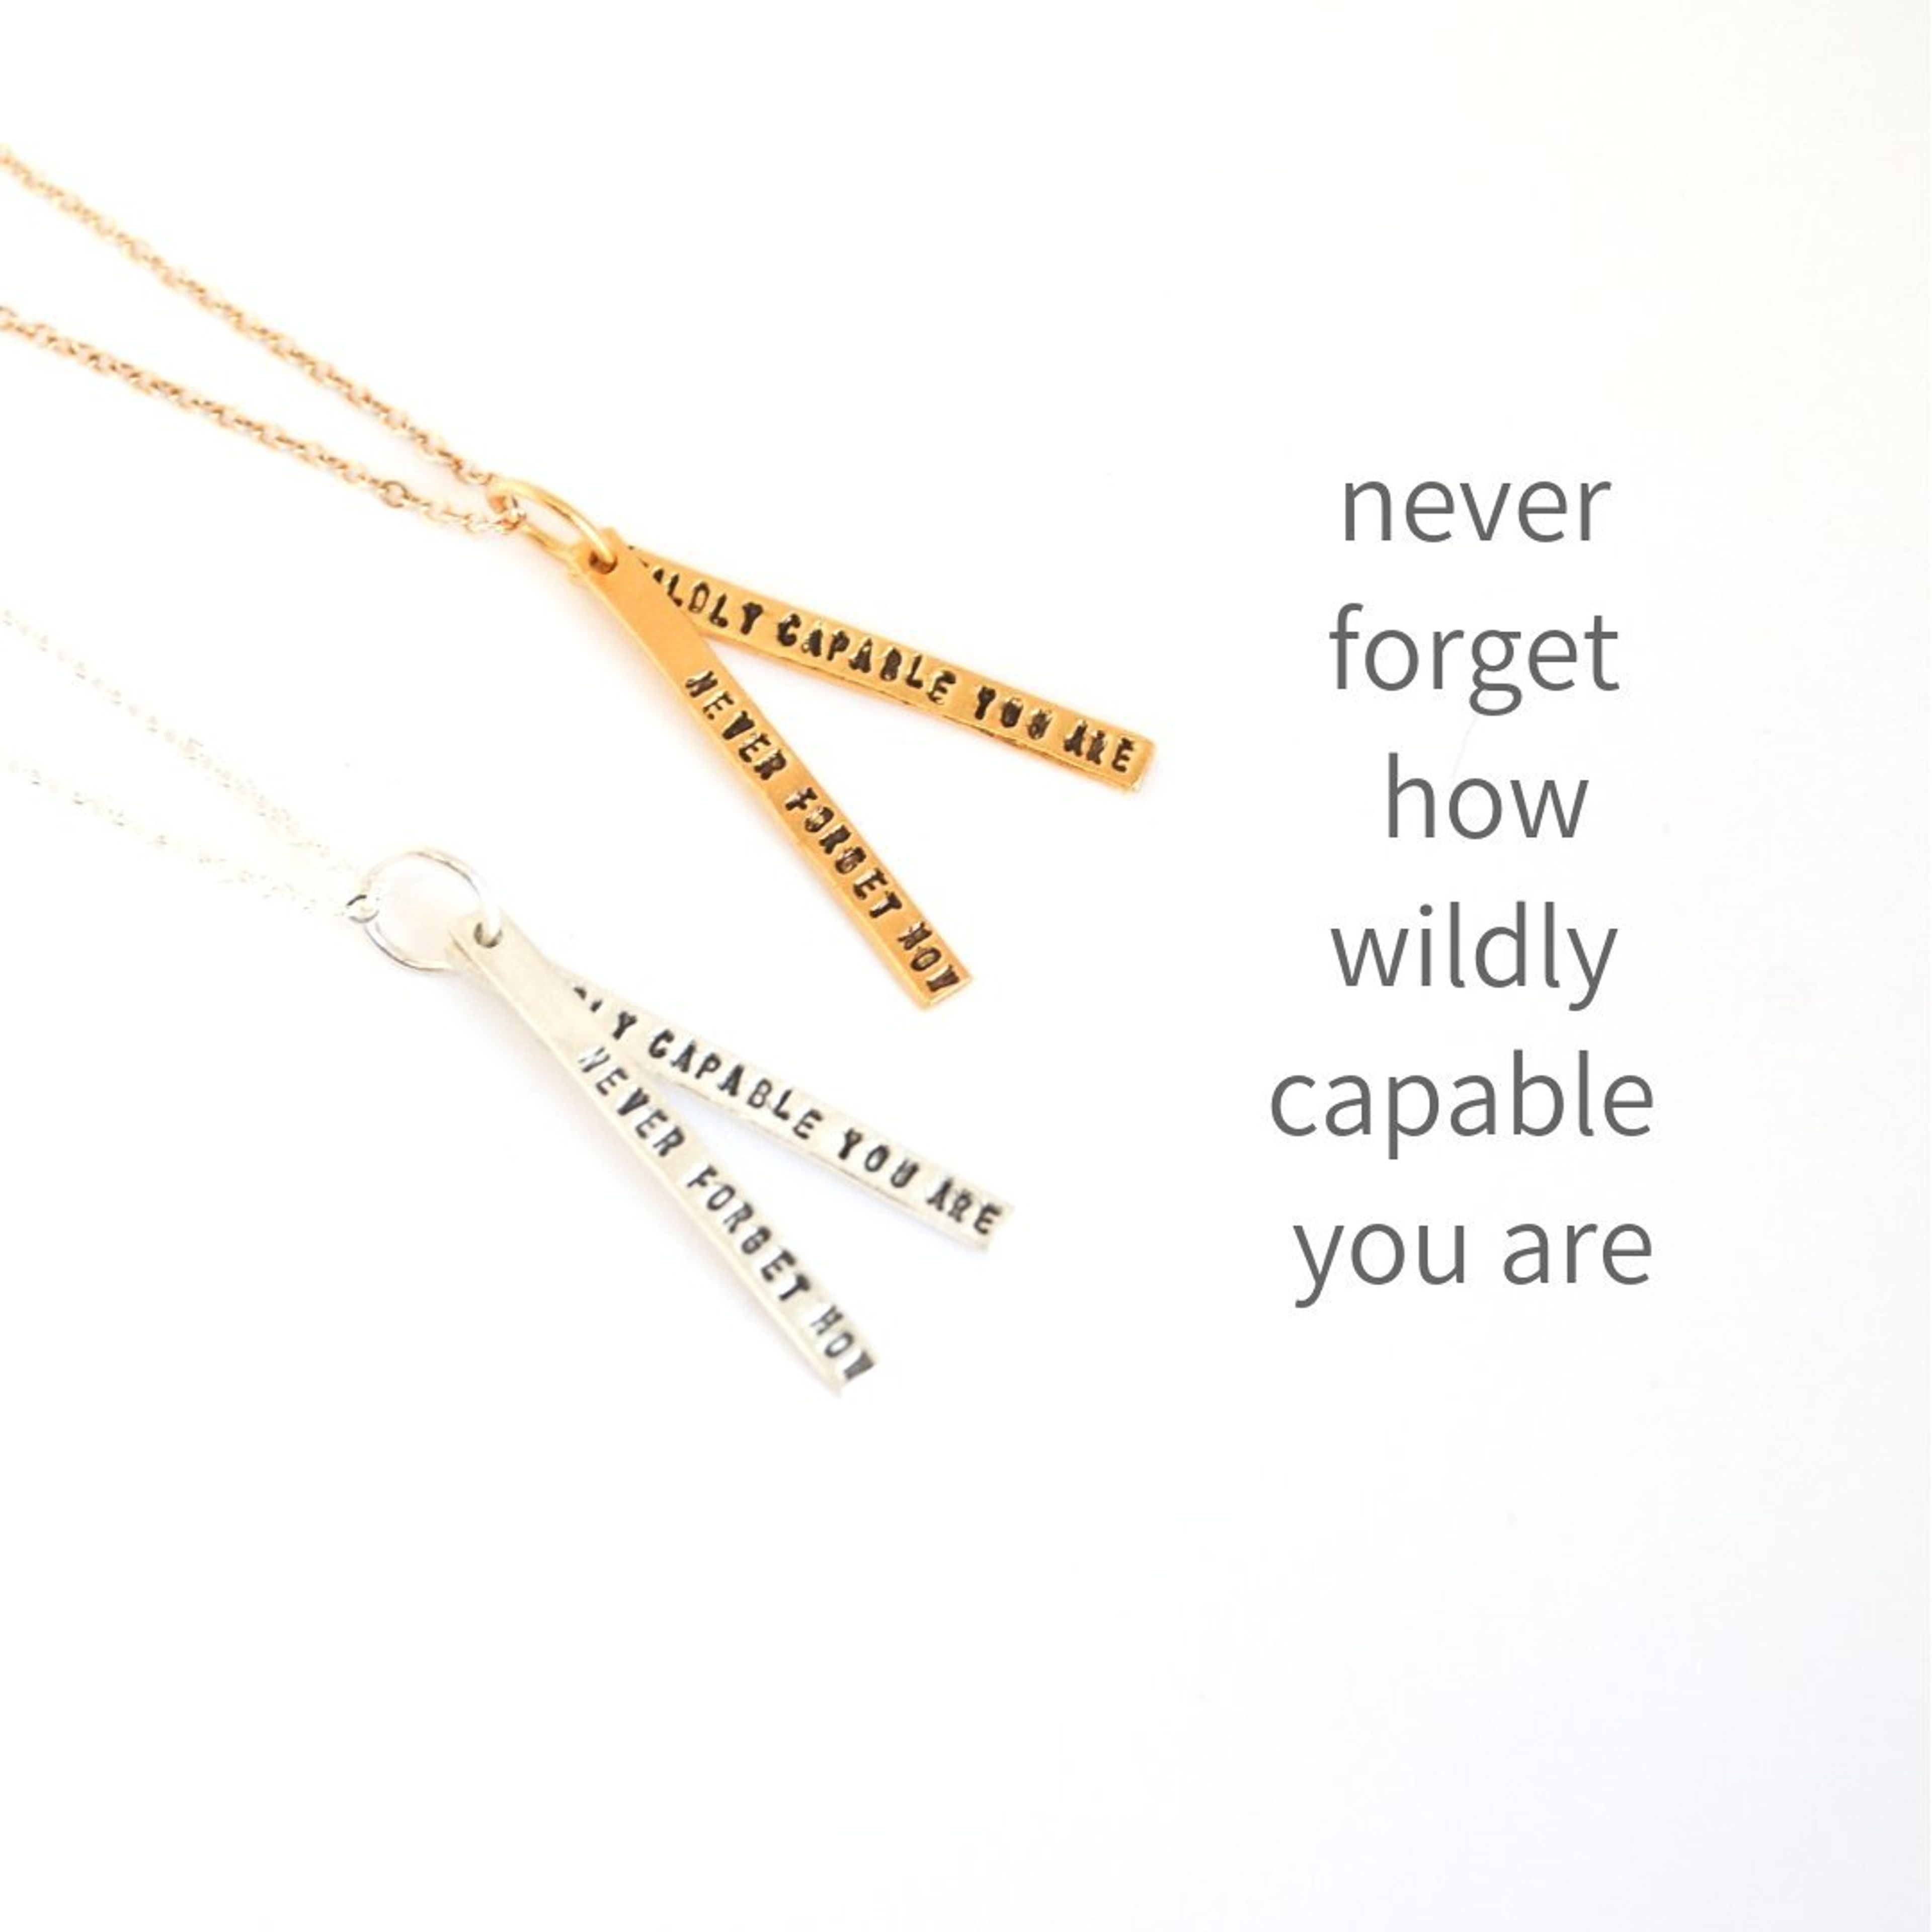 "Never forget how wildly capable you are" quote necklace